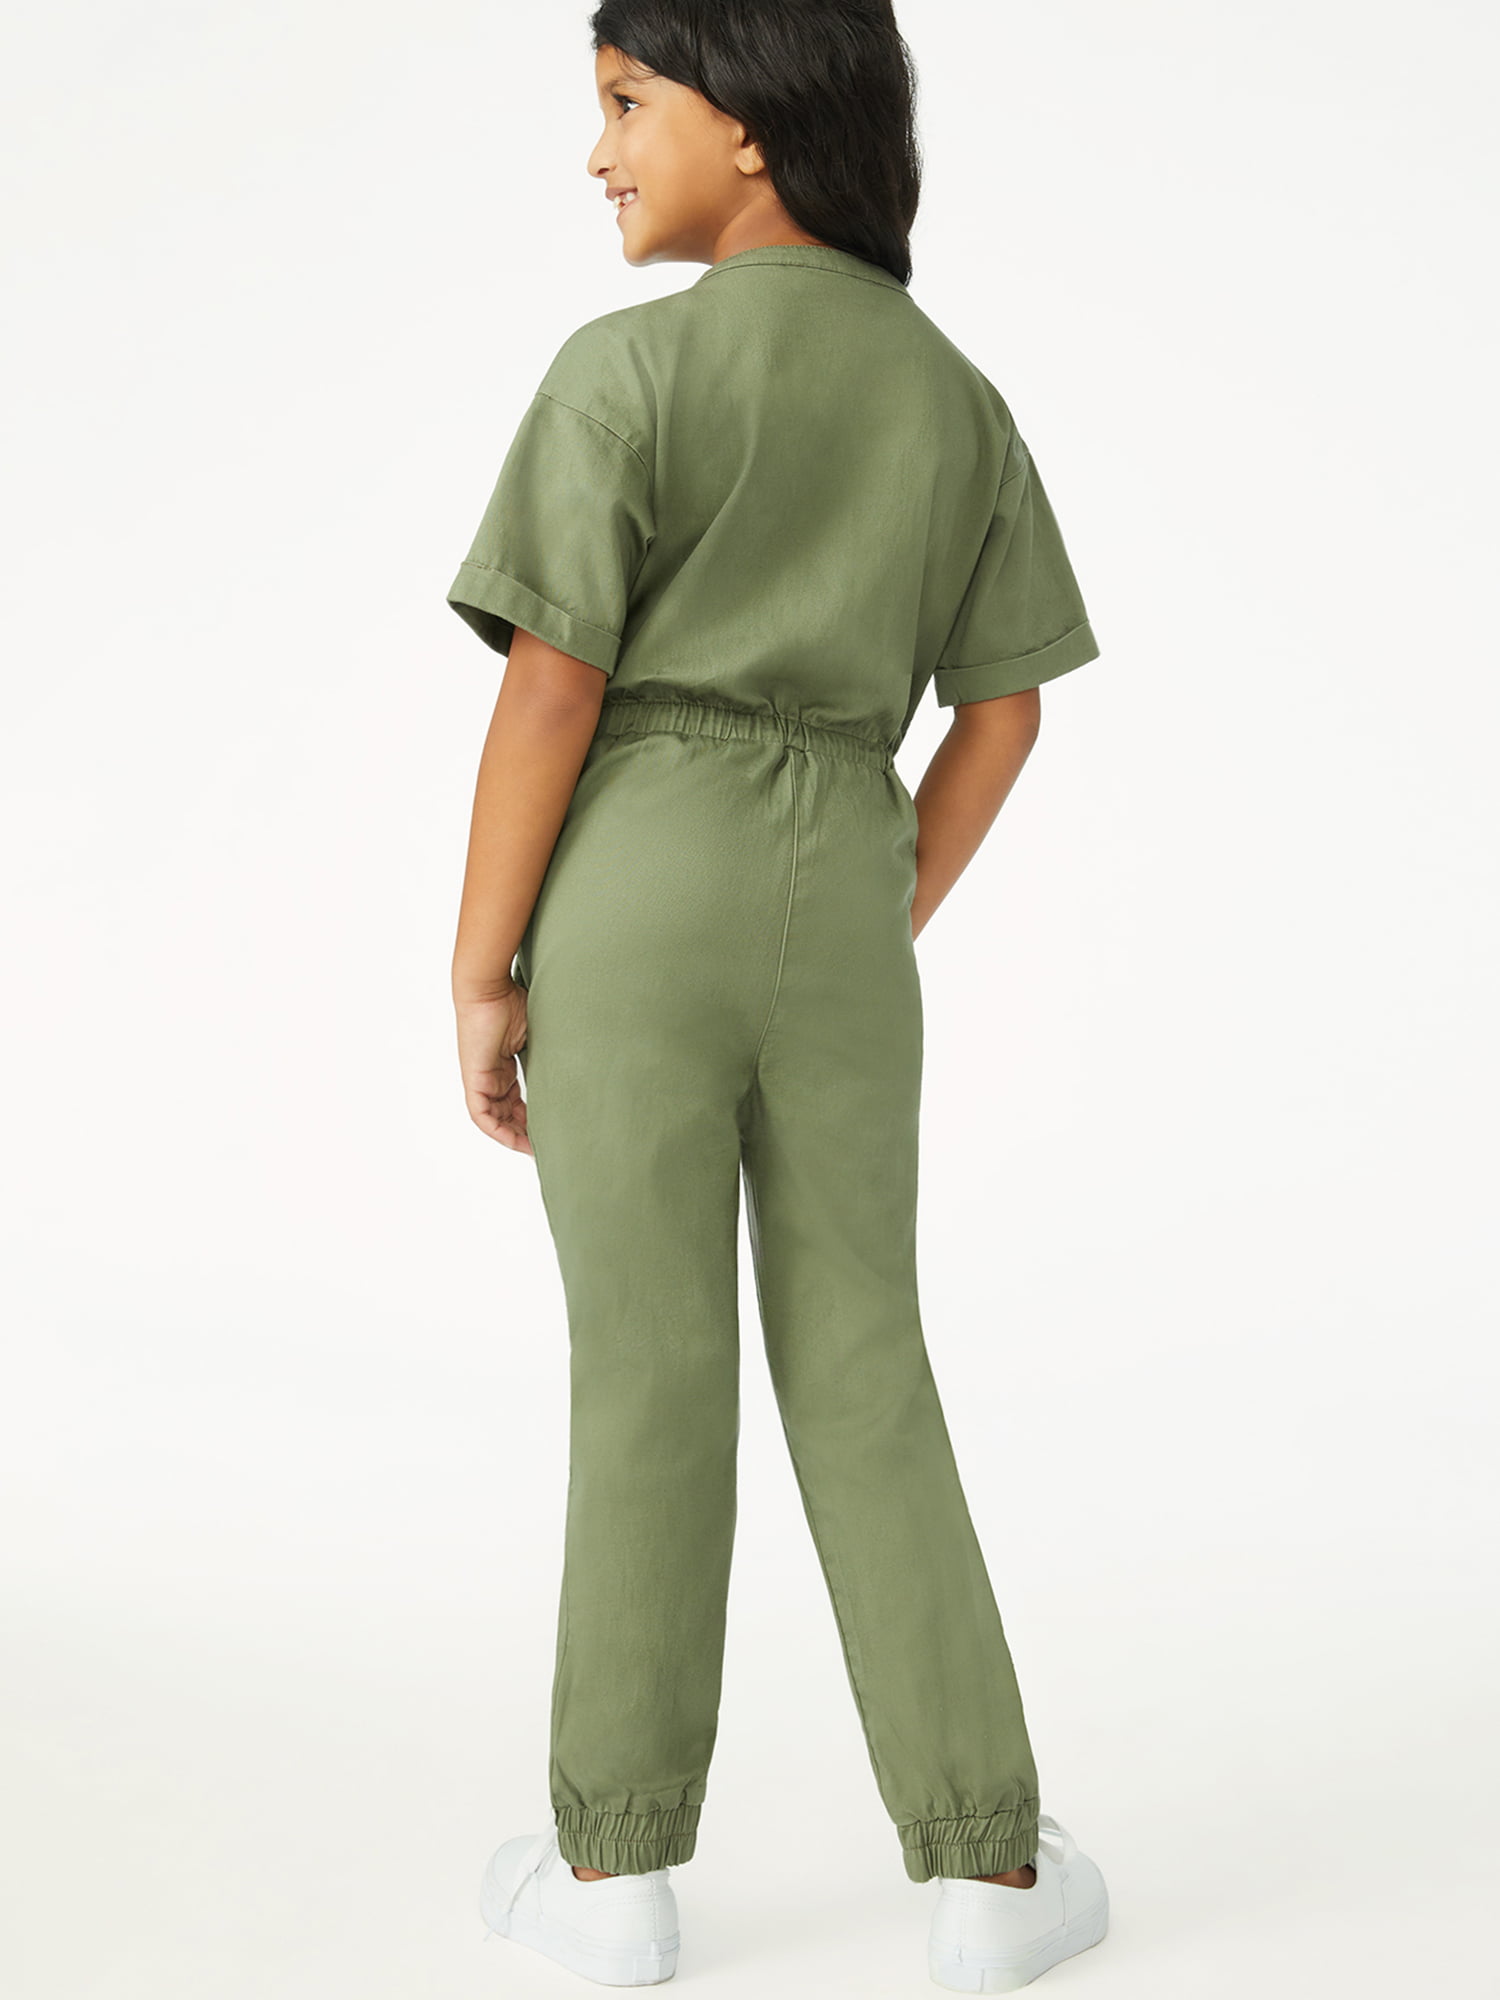 $120 Inc International Concepts Petite Belted Utility Jumpsuit Green Size  10 P